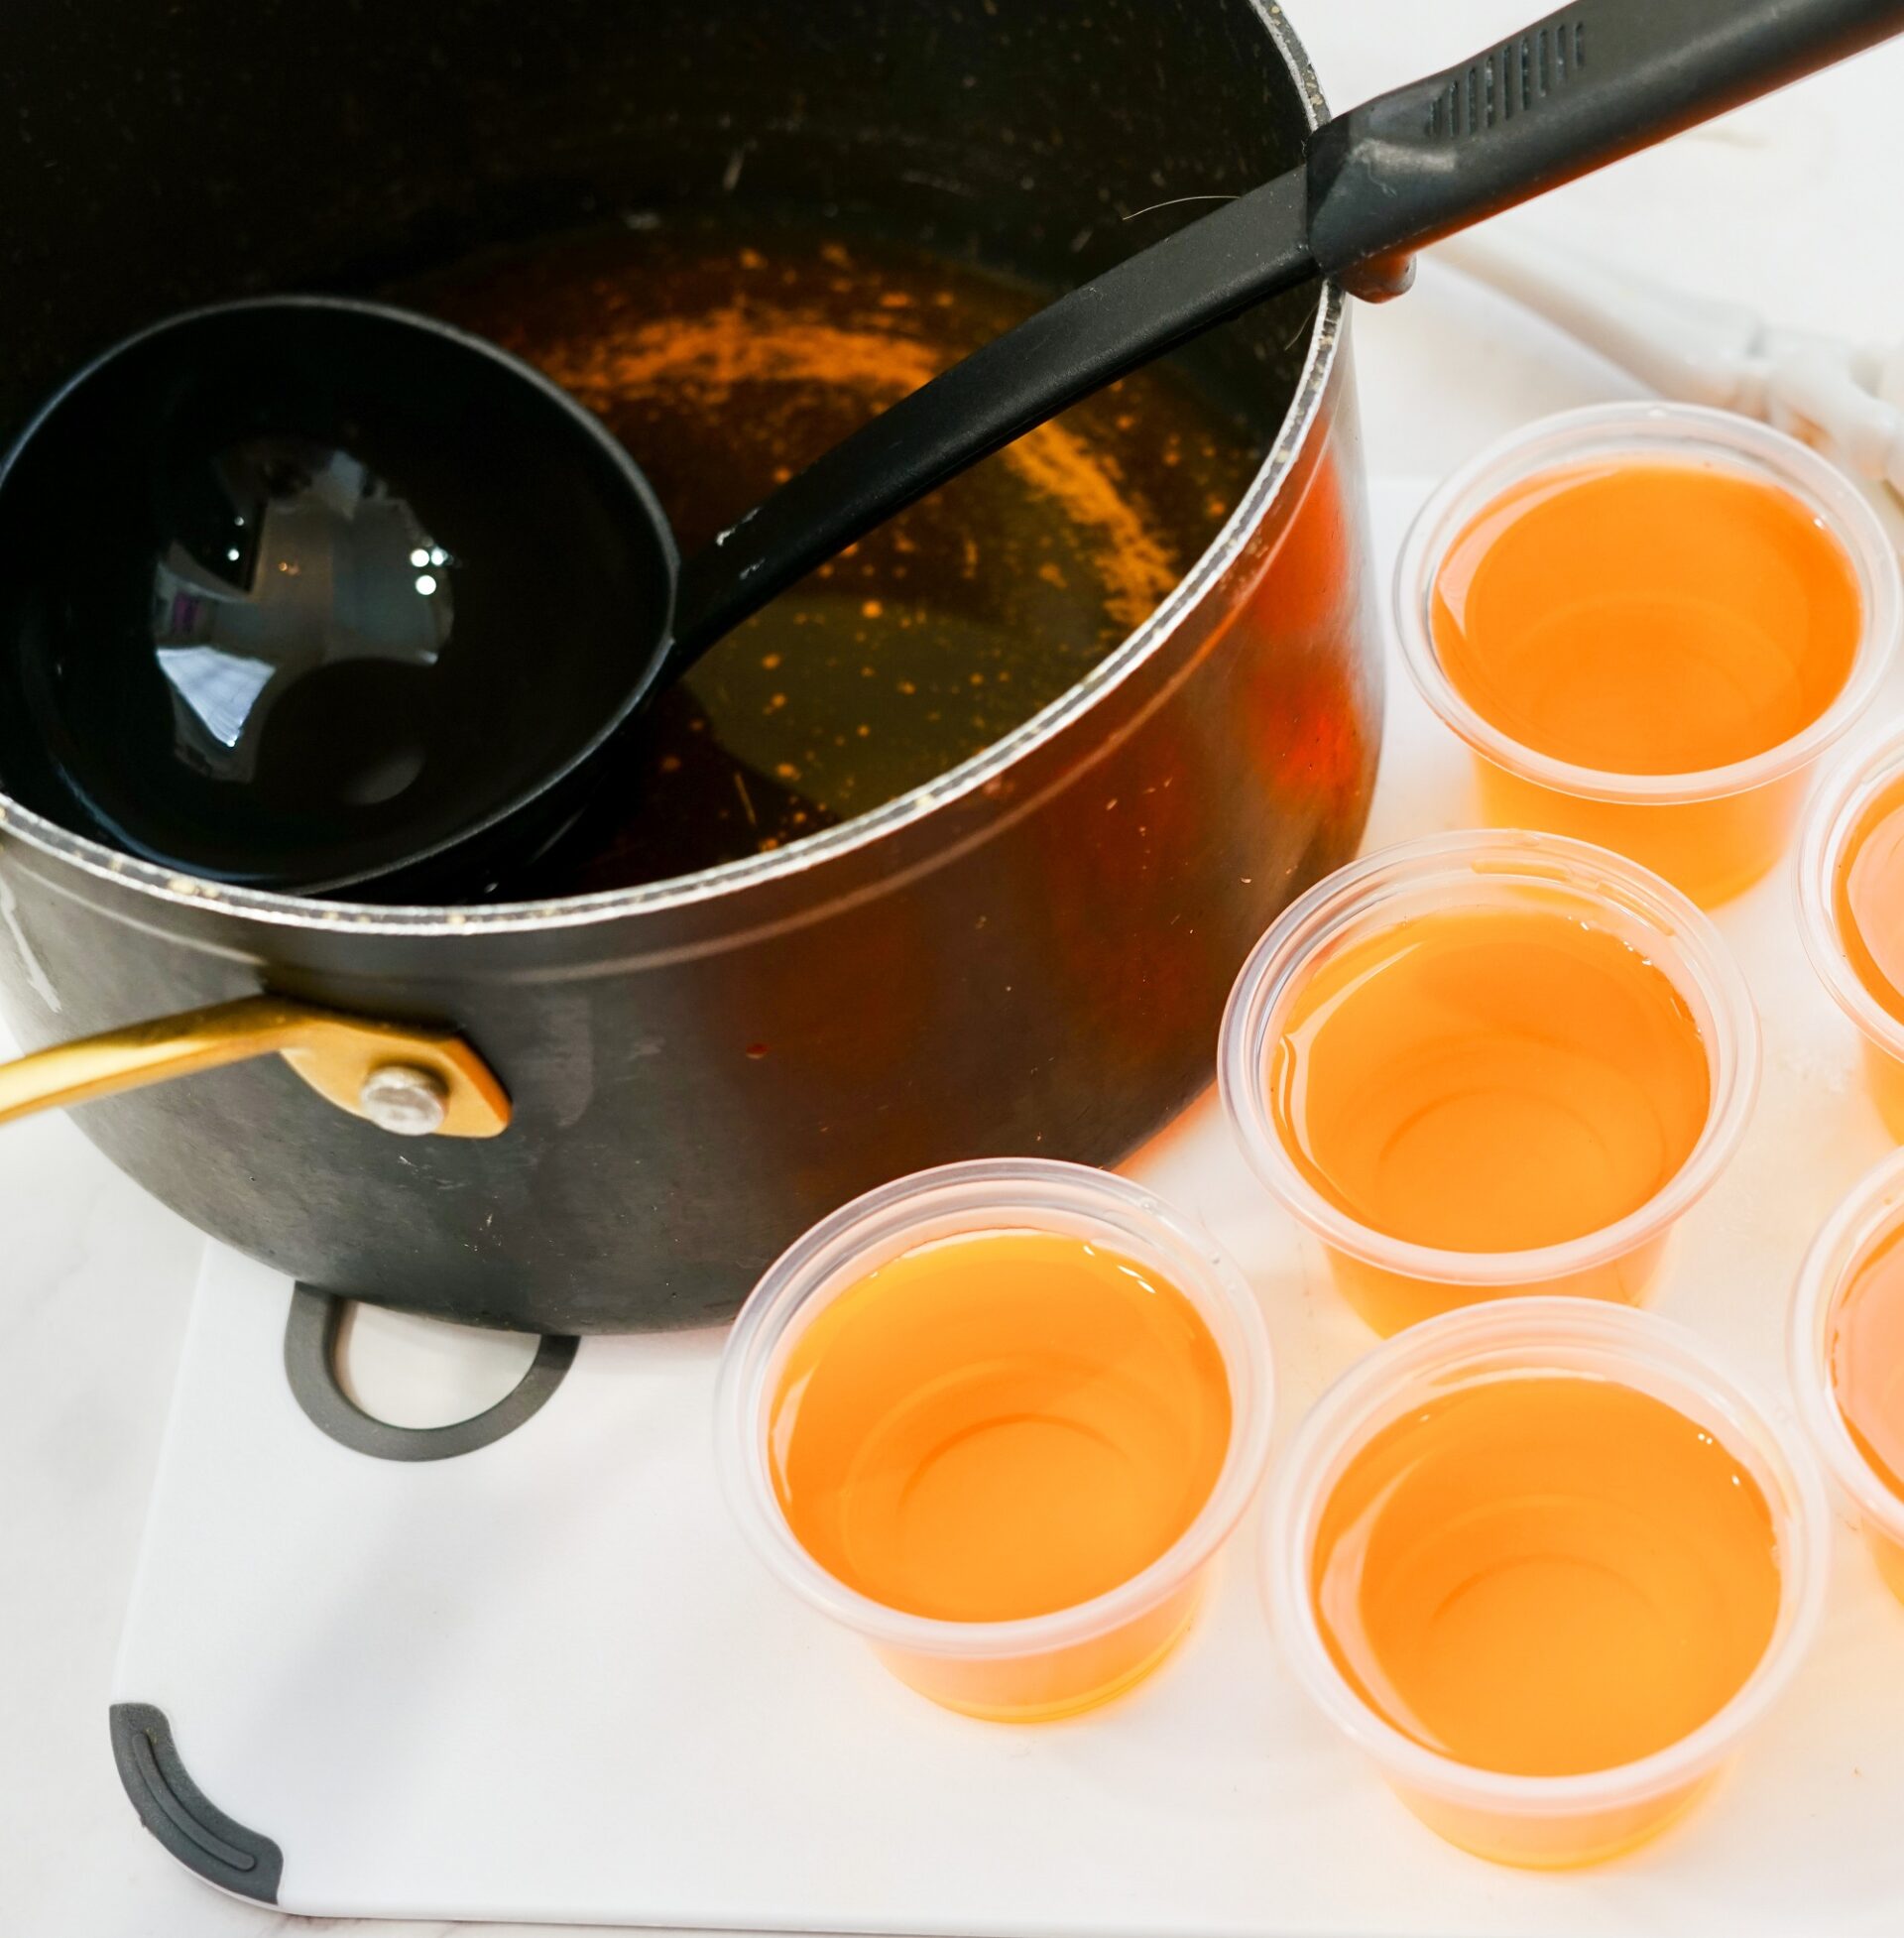 Using a ladle to spoon mixture into condiment cups.